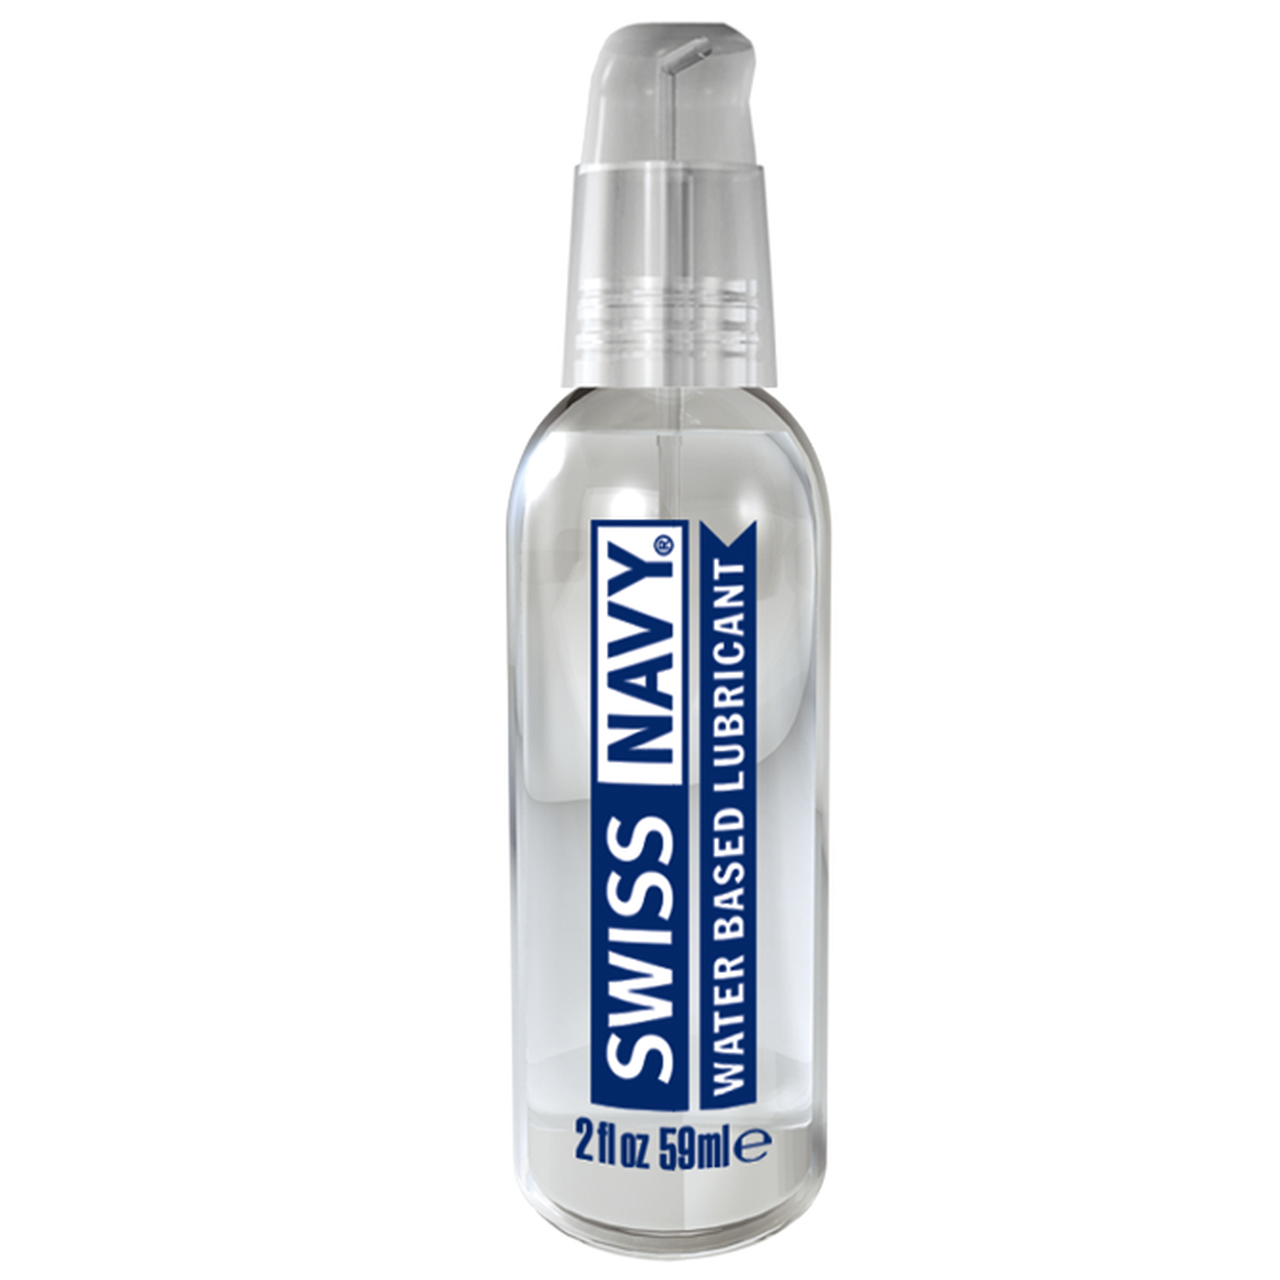 Need a high-quality water-based lube for all your intimate parts? Our Swiss Navy lube is gentle, affordable, and shouldn’t cause irritation.  